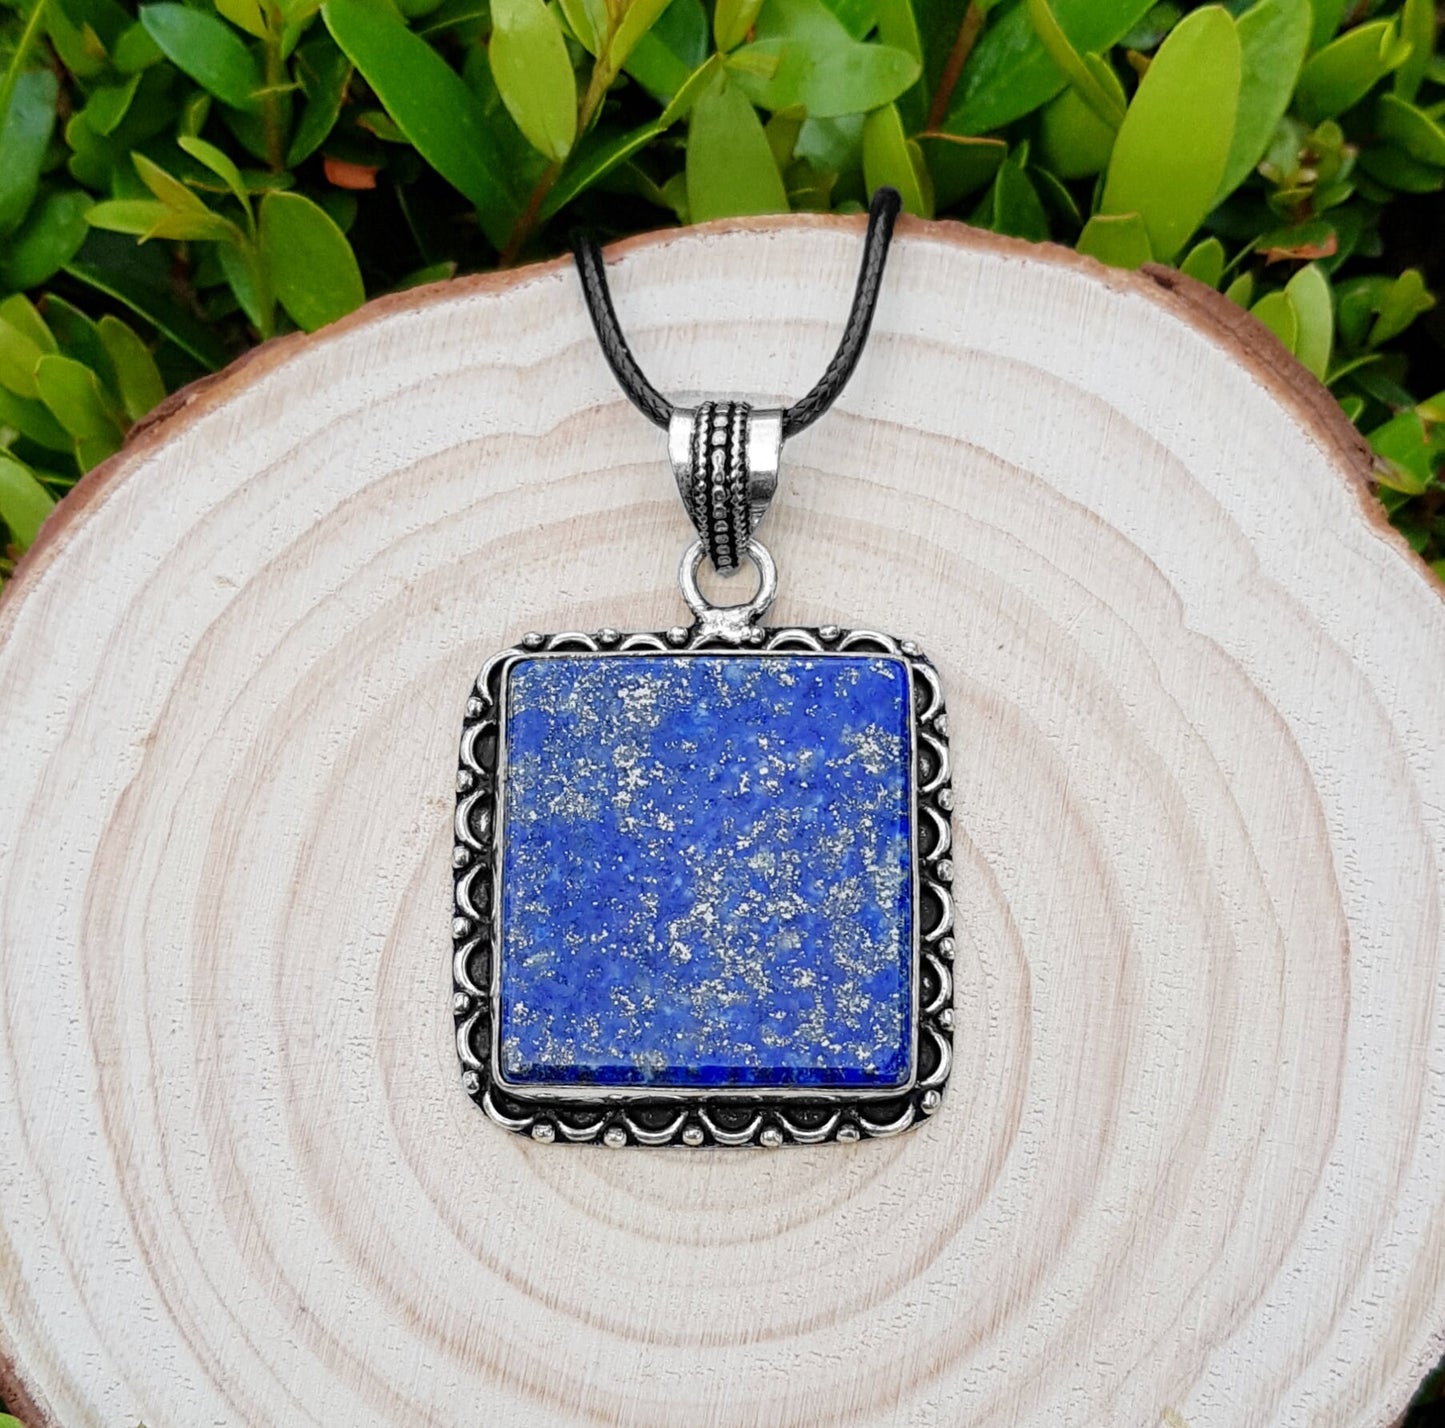 Lapis Lazuli Necklace In Sterling Silver With Adjustable Chain Boho Necklace Unique Jewellery One Of A Kind Gift